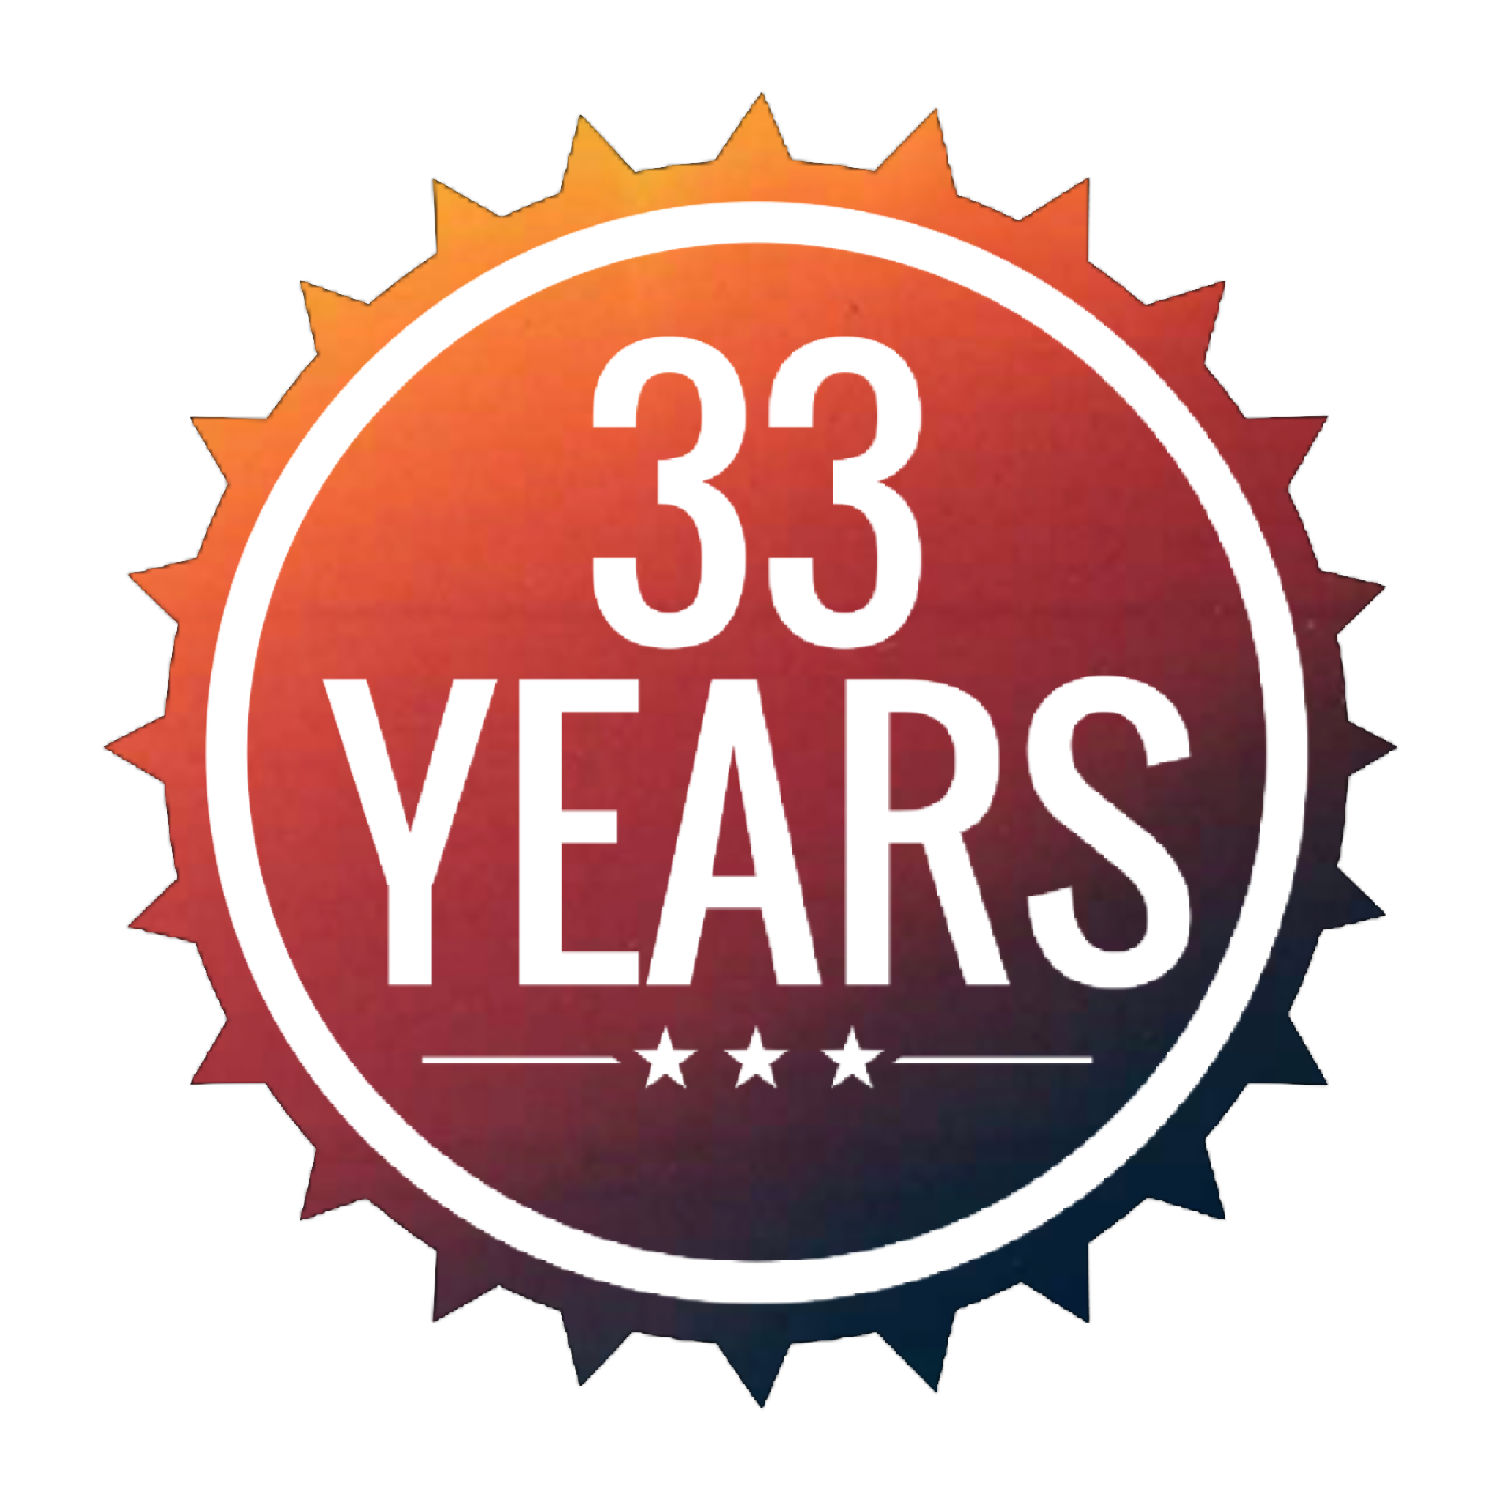 Events — 33 Years